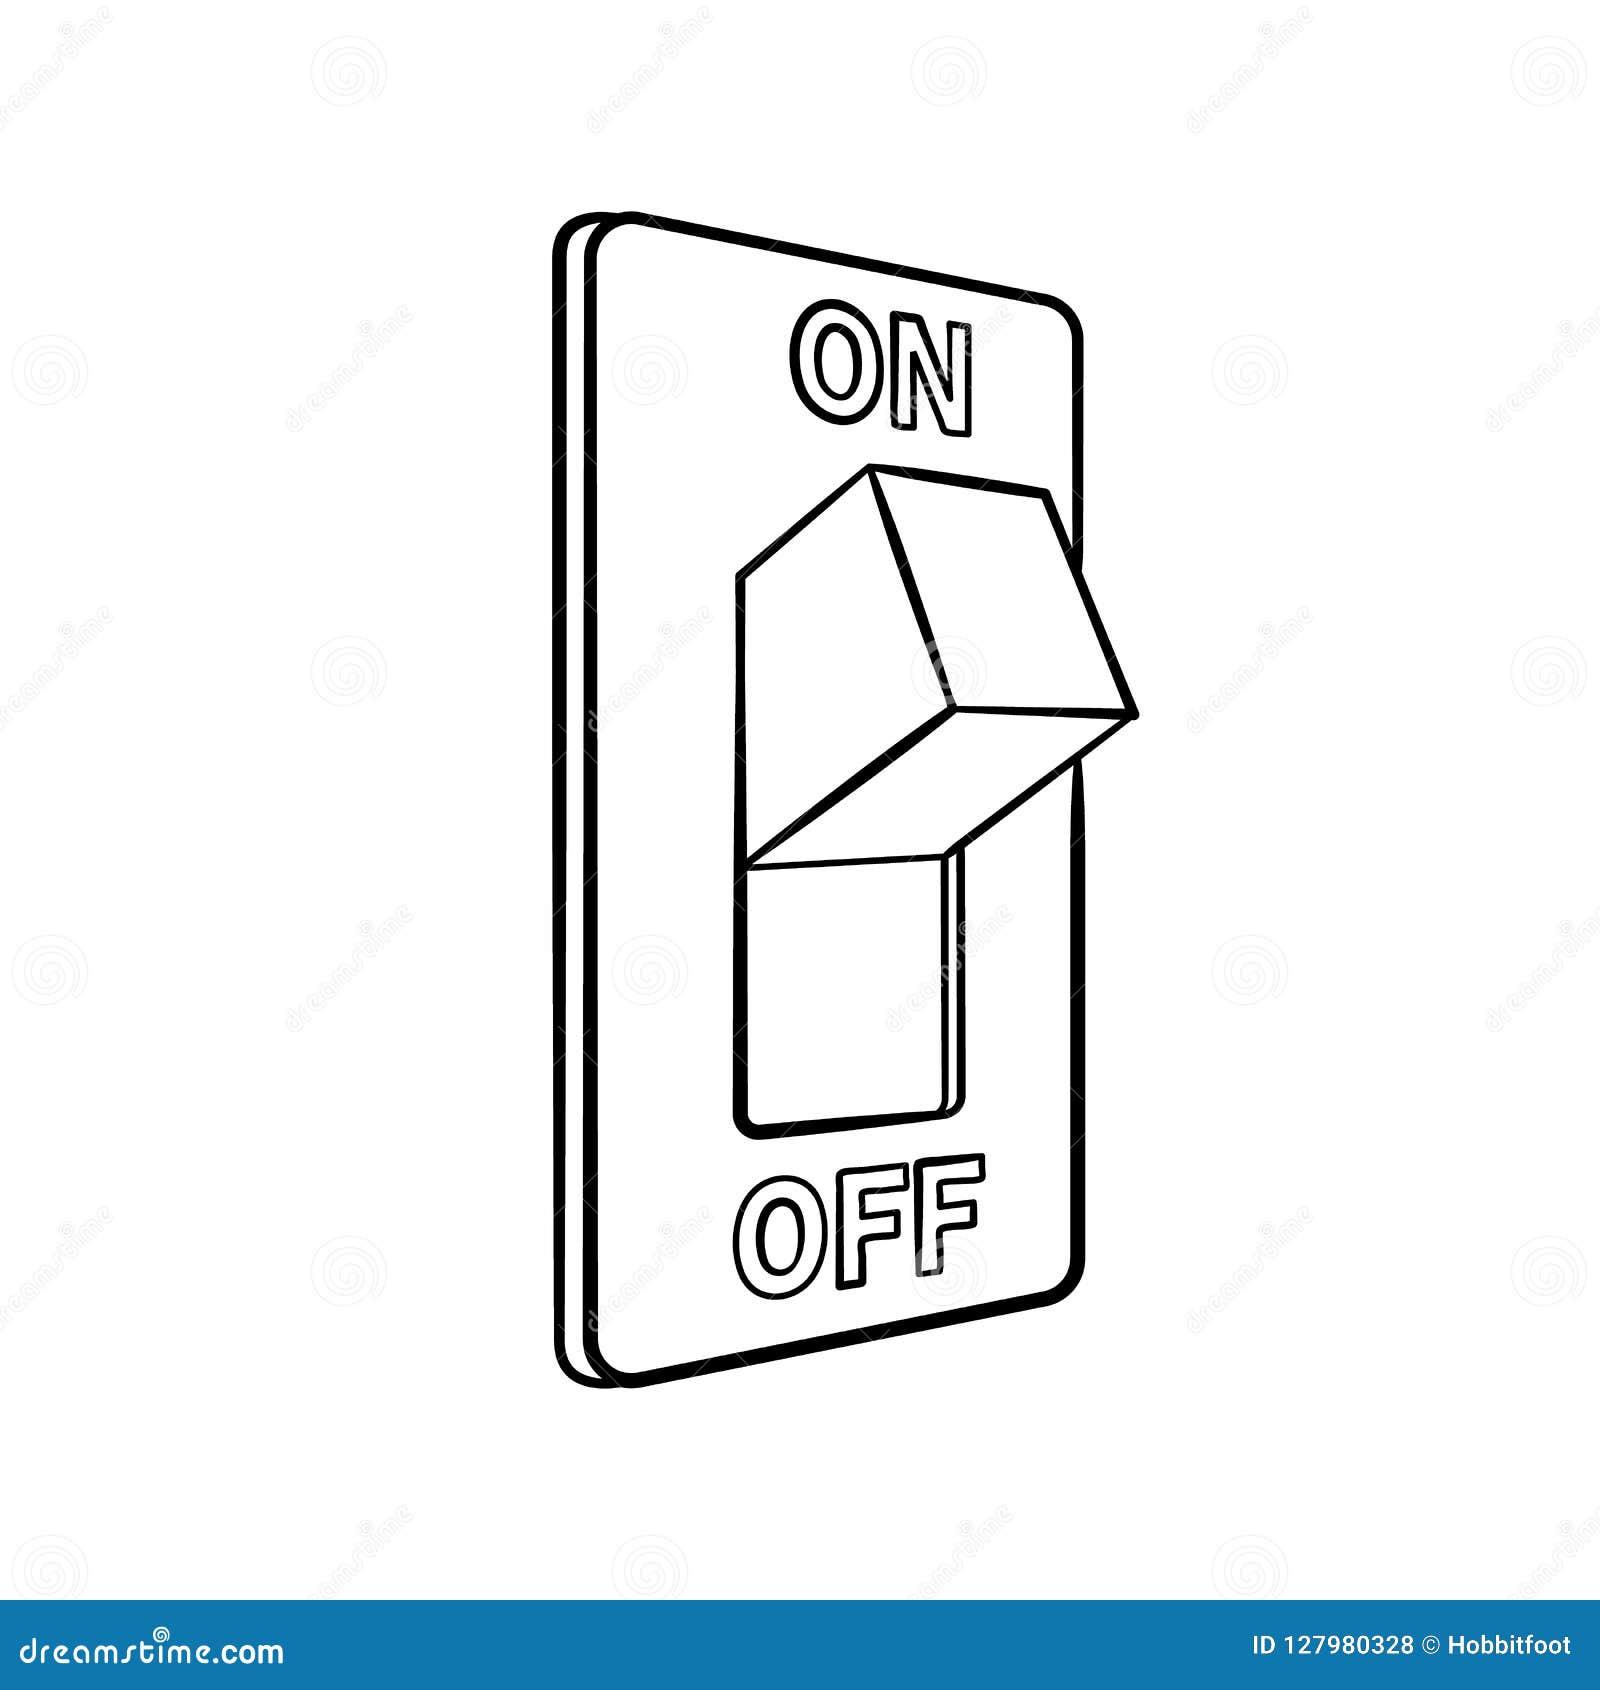 how to draw a light switch - YouTube